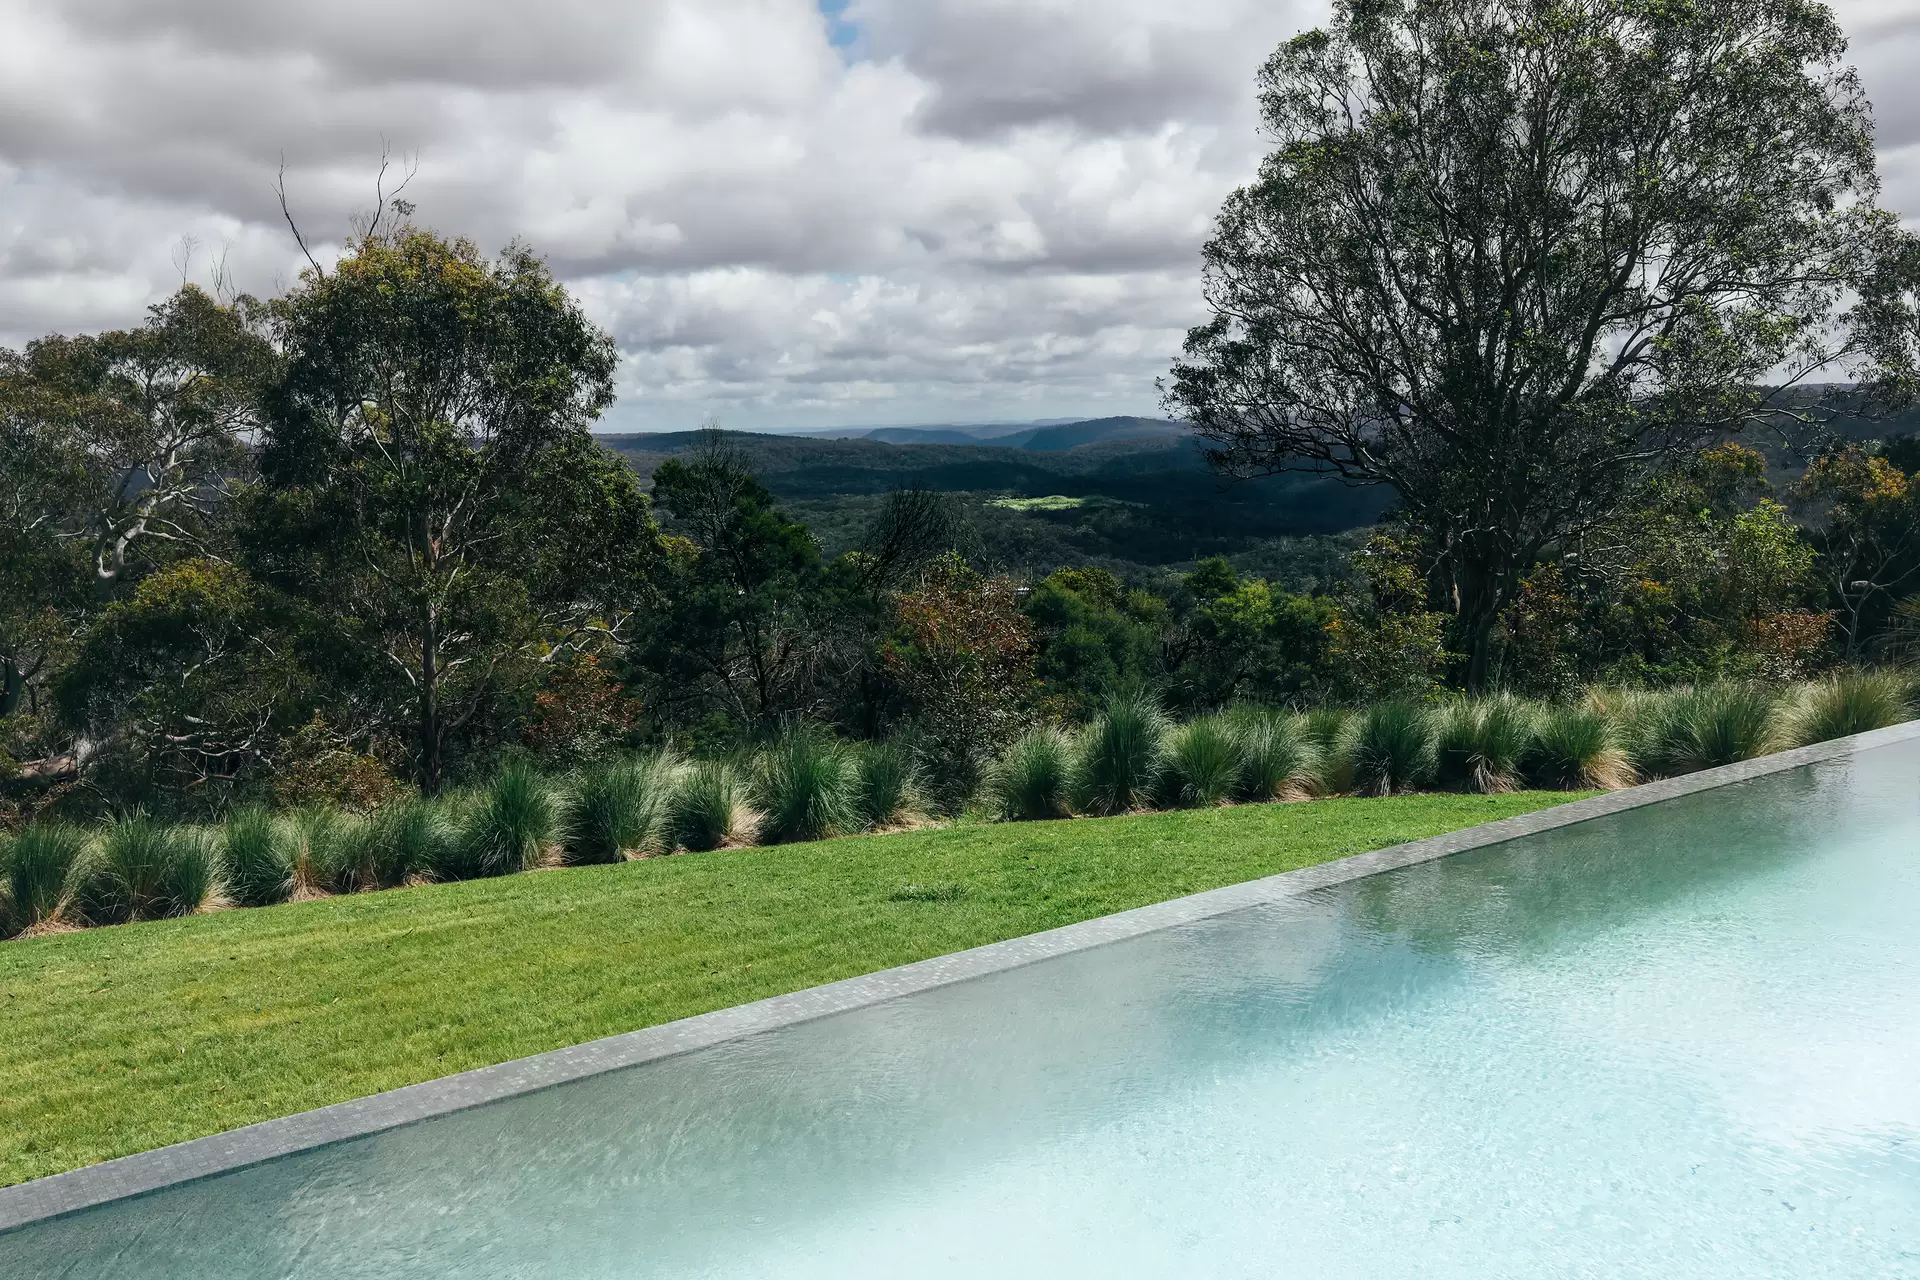 Photo #28: 8 Greyladyes Lane, Mittagong - Sold by Drew Lindsay Sotheby's International Realty